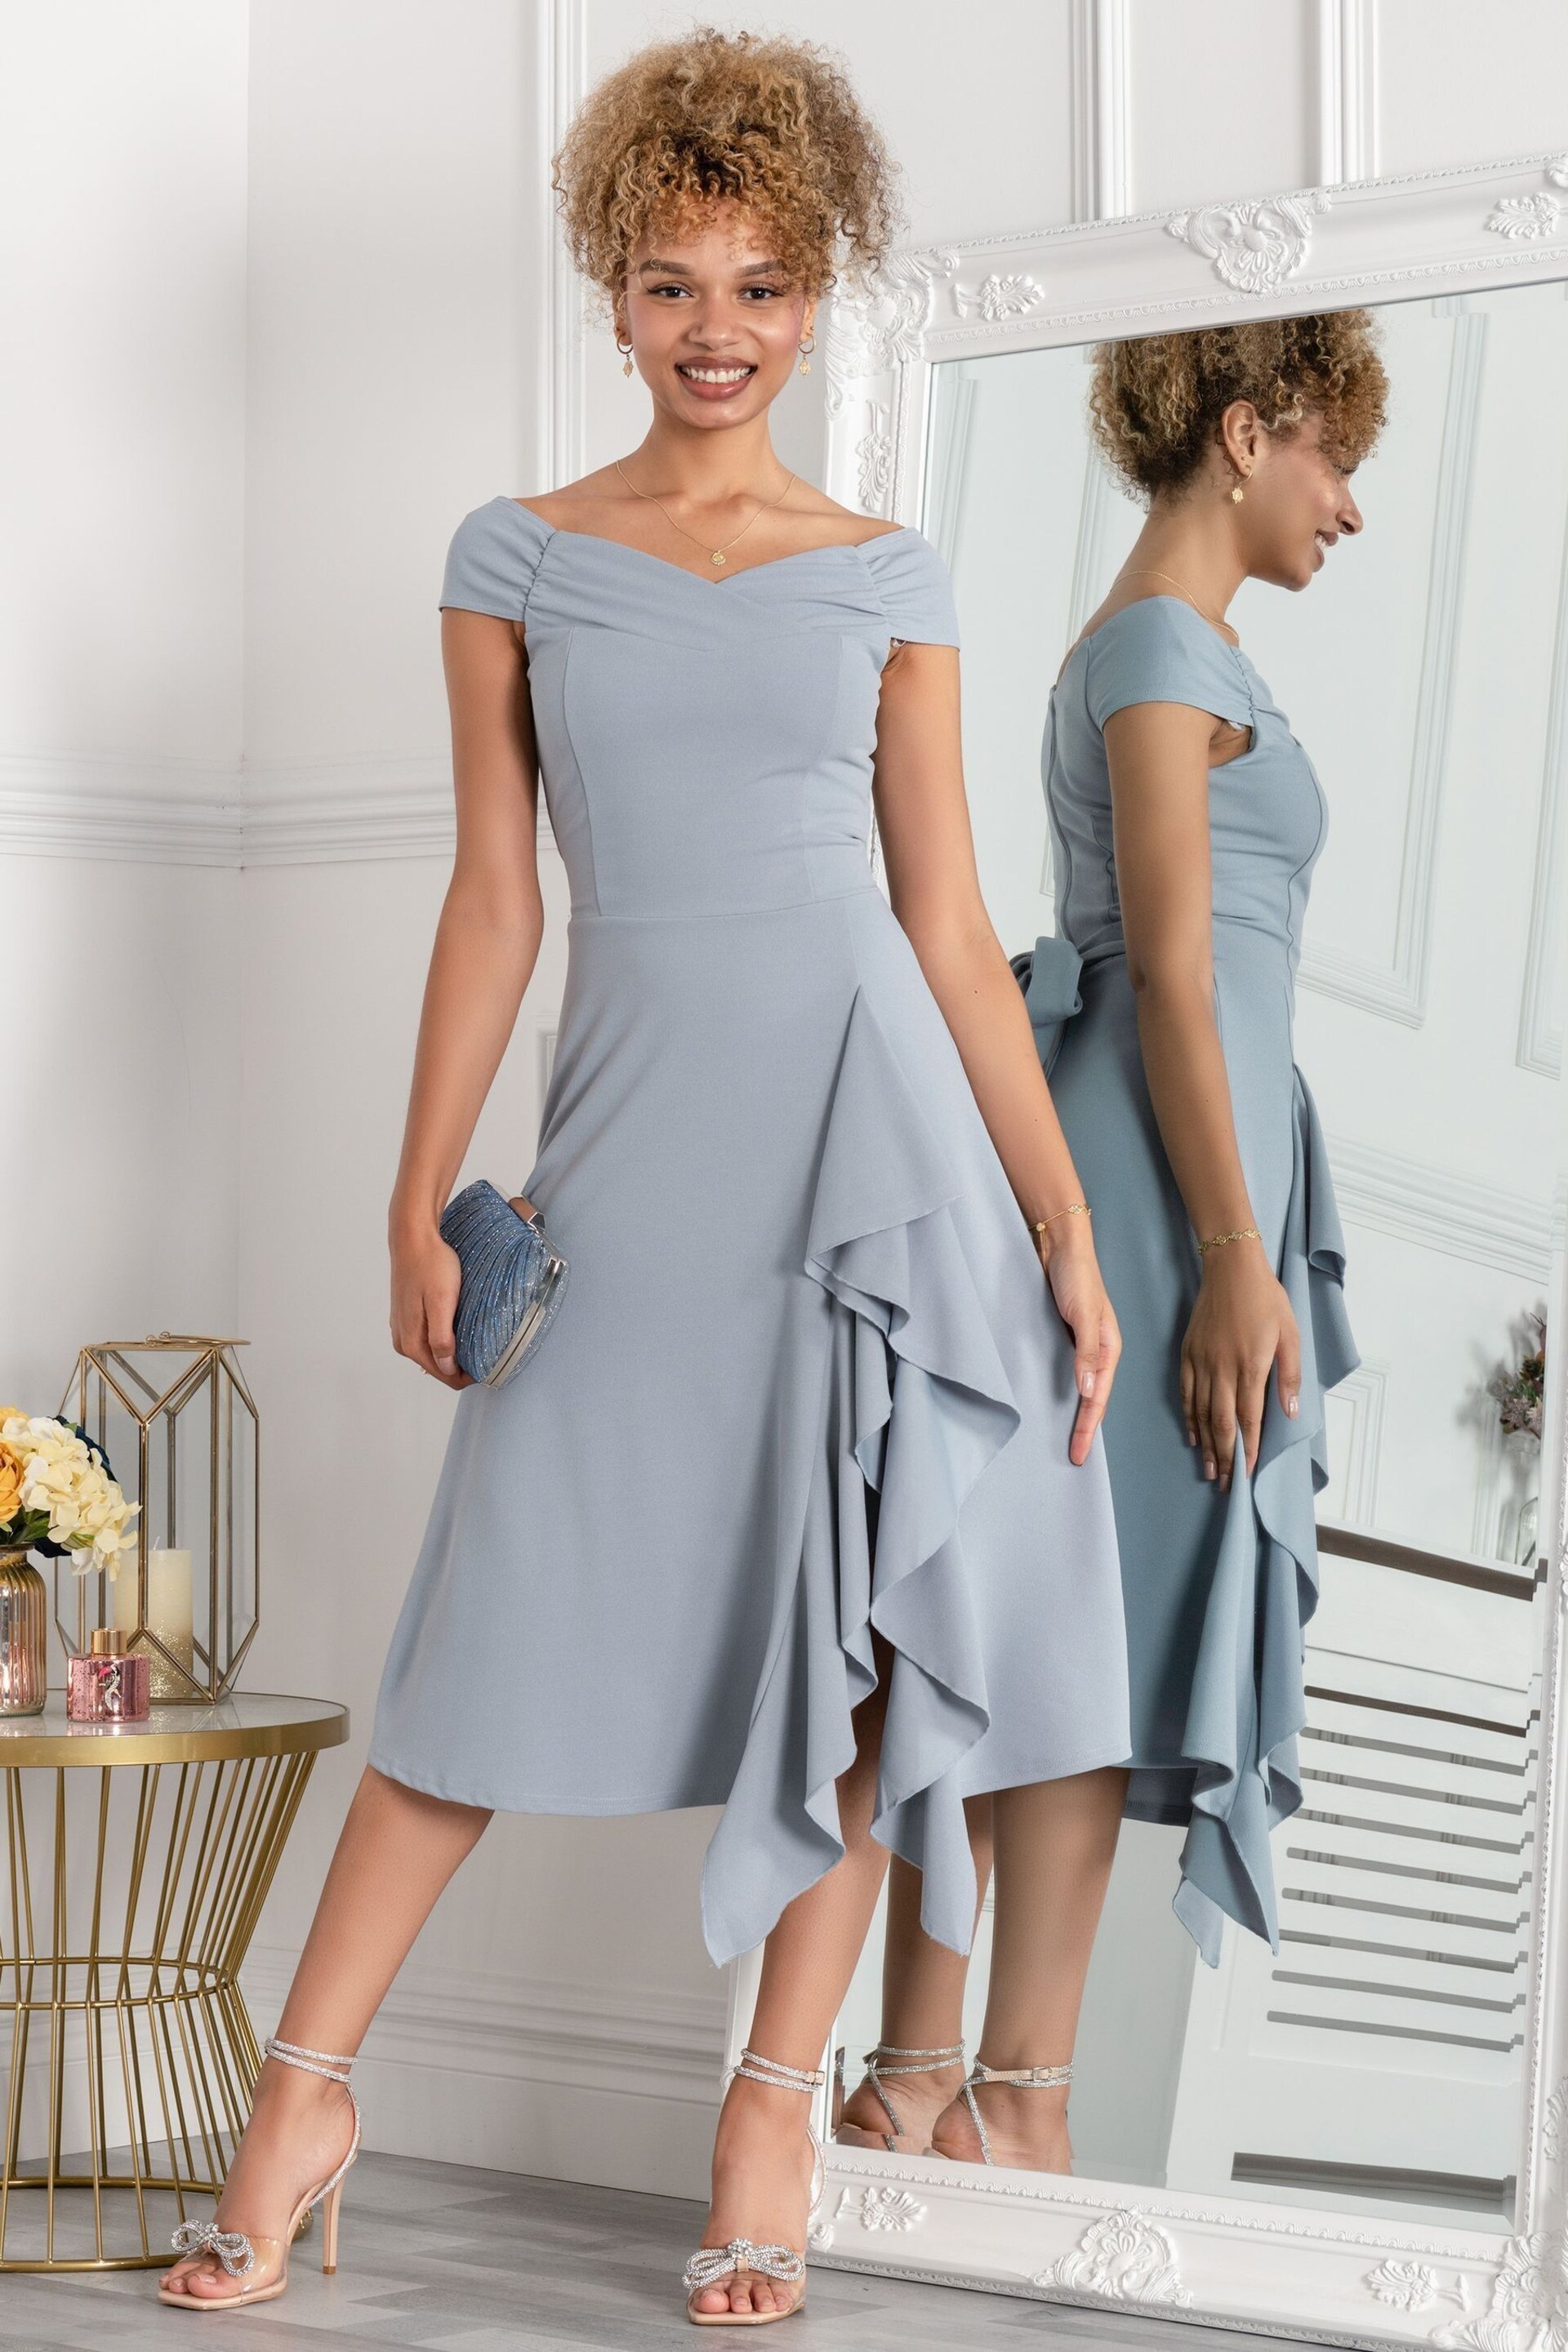 Jolie Moi Grey Desiree Frill Fit & Flare Dress - Image 1 of 5